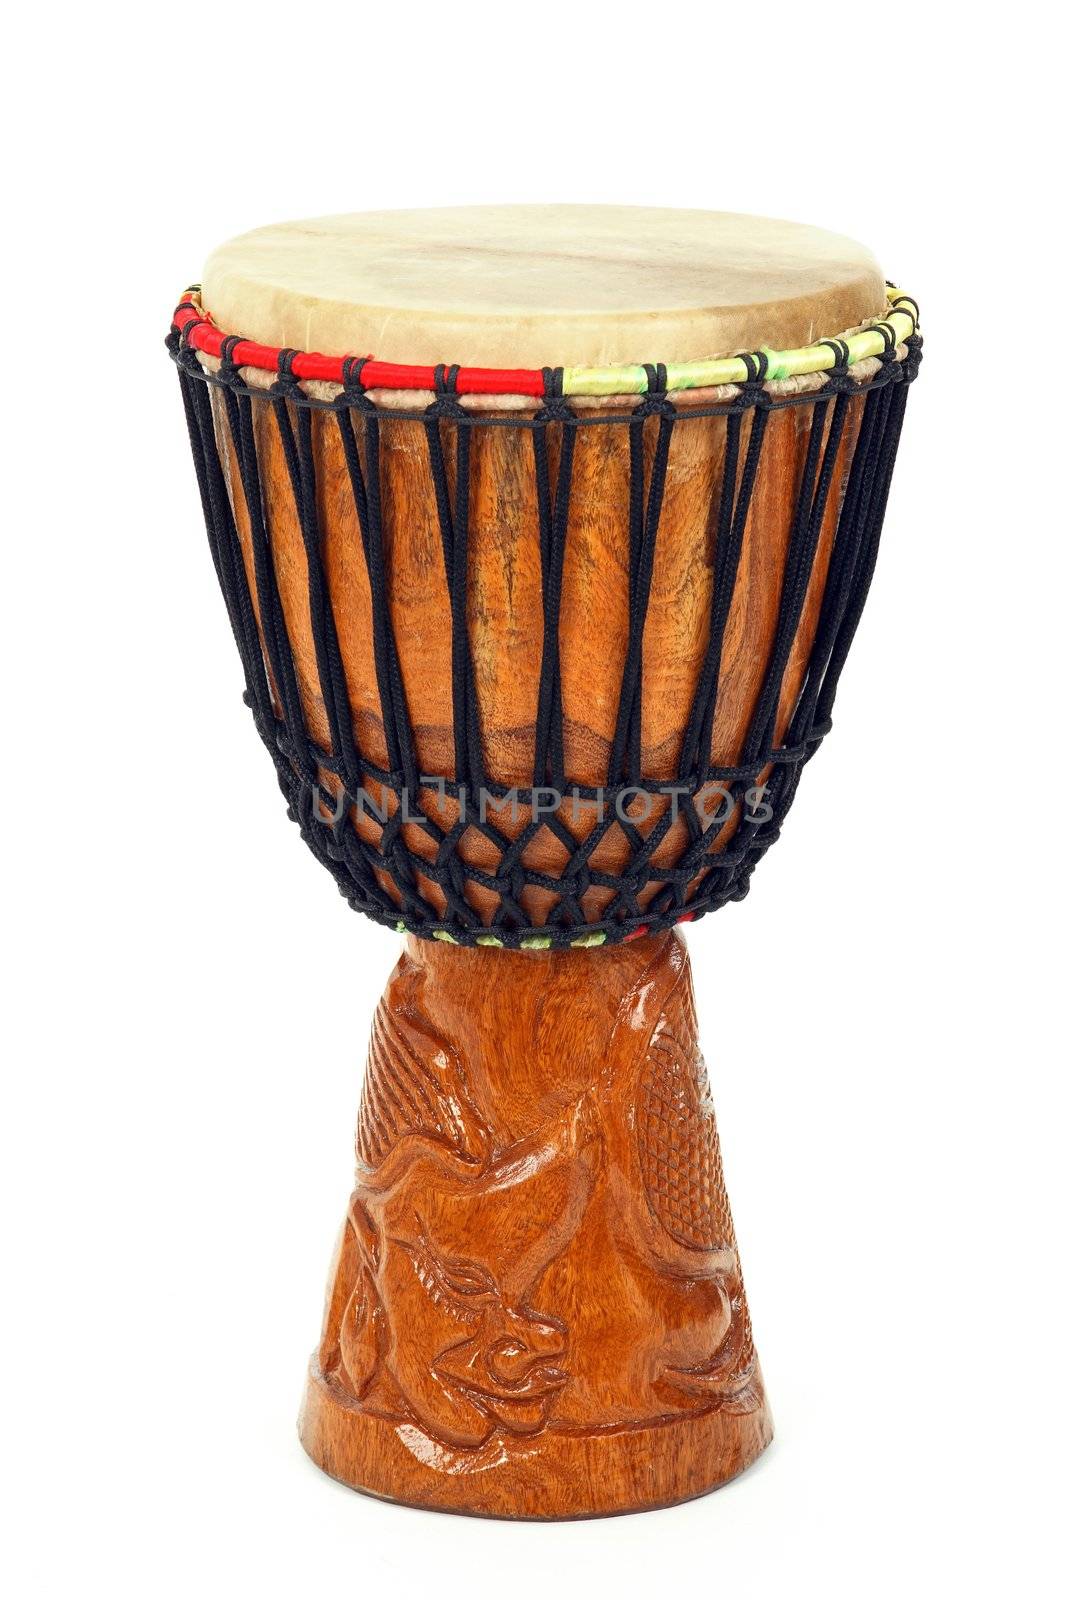 Carved African djembe drum by anikasalsera